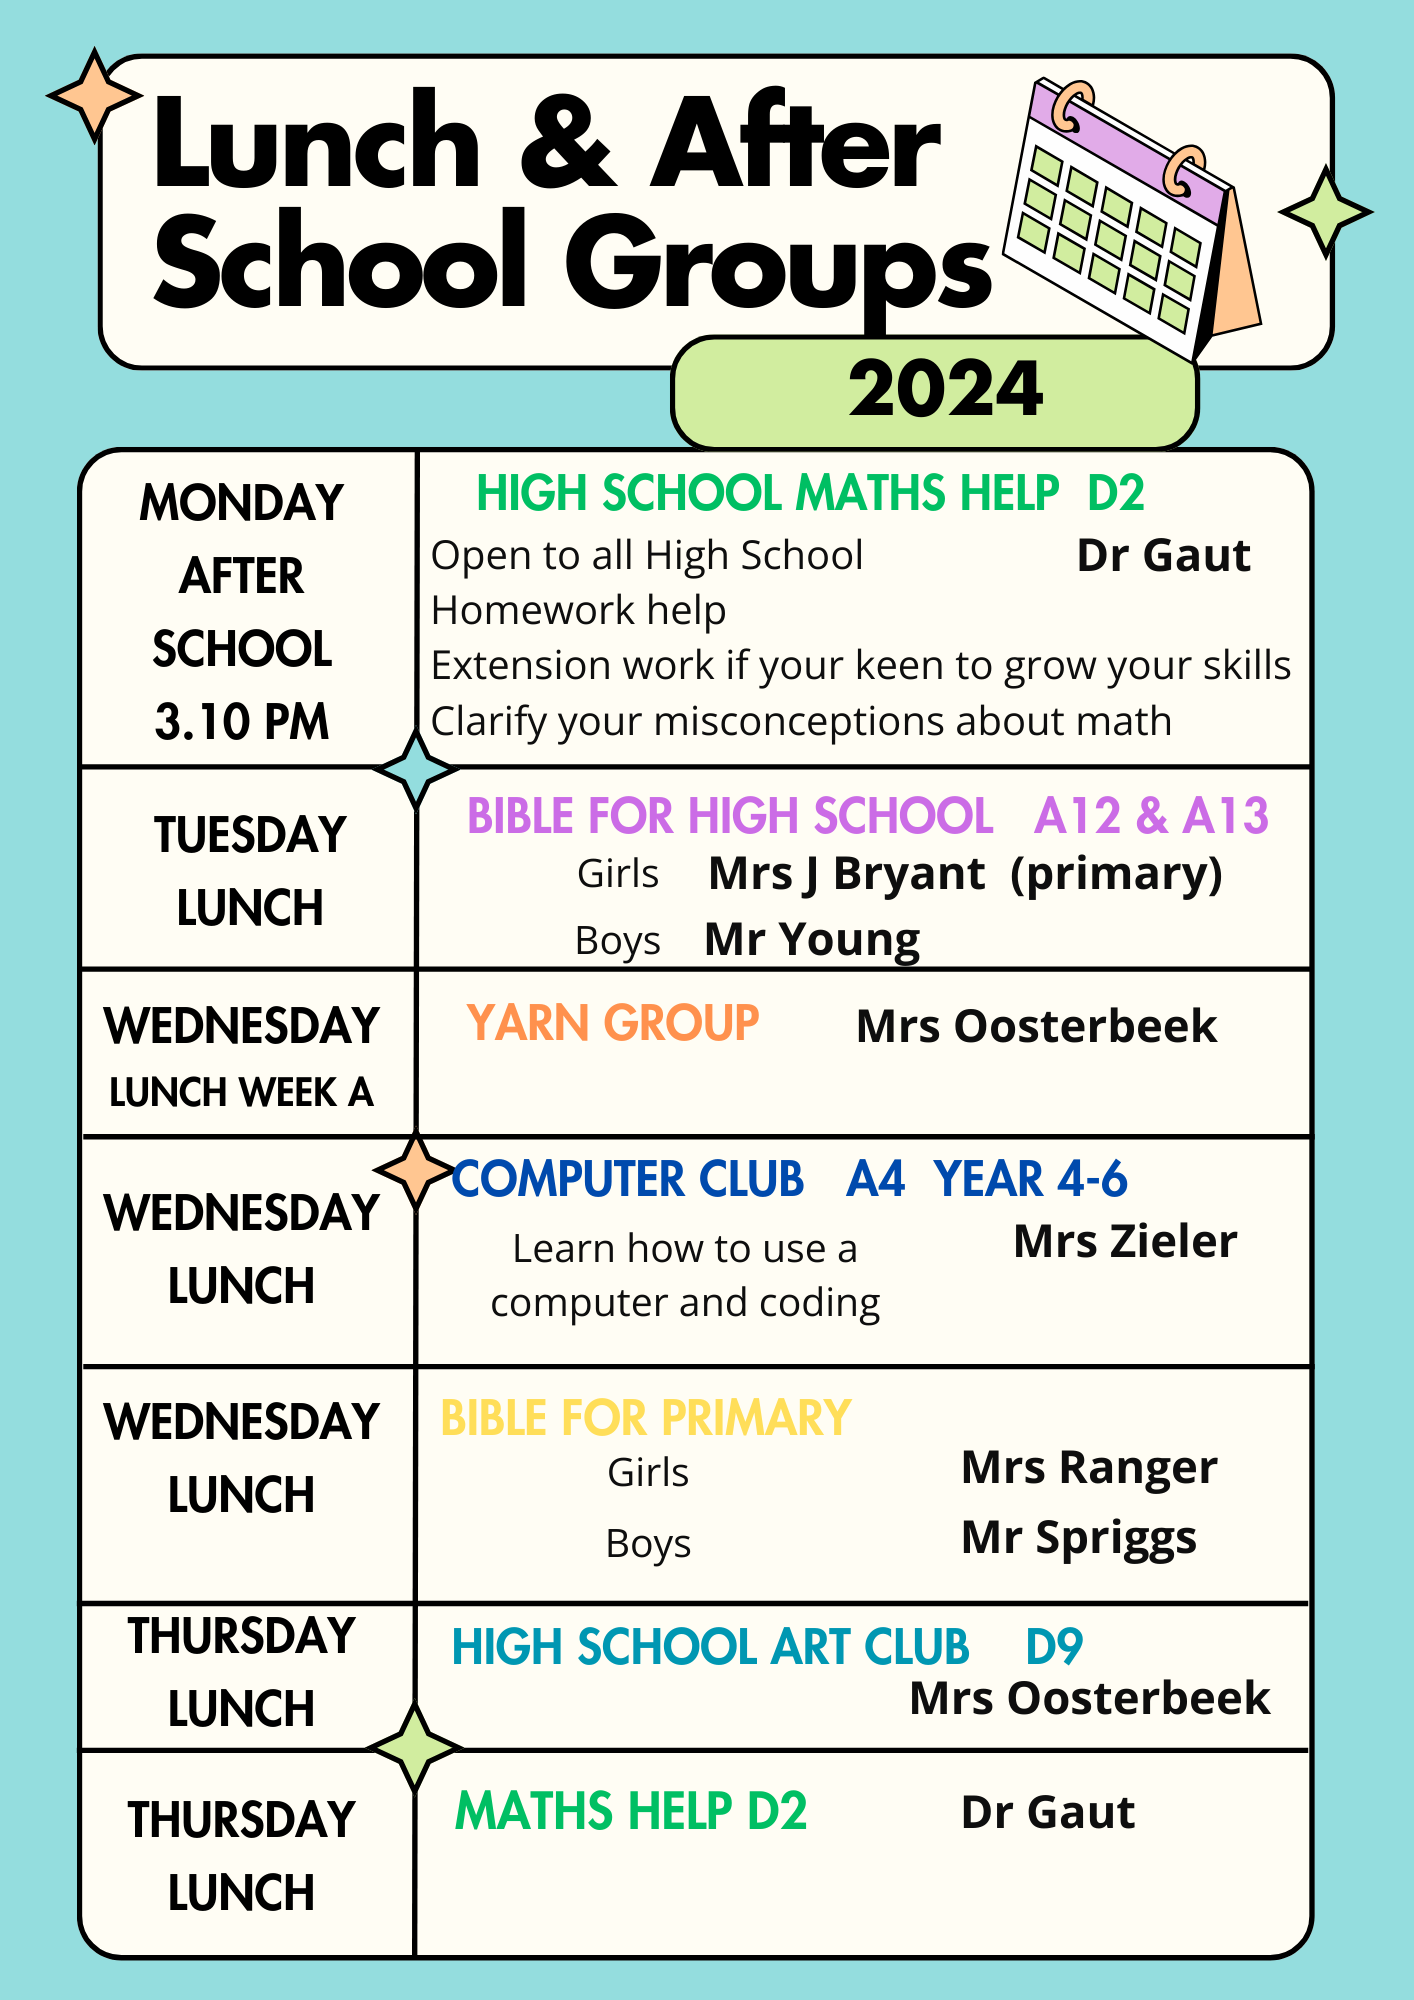 Lunchtime After school groups